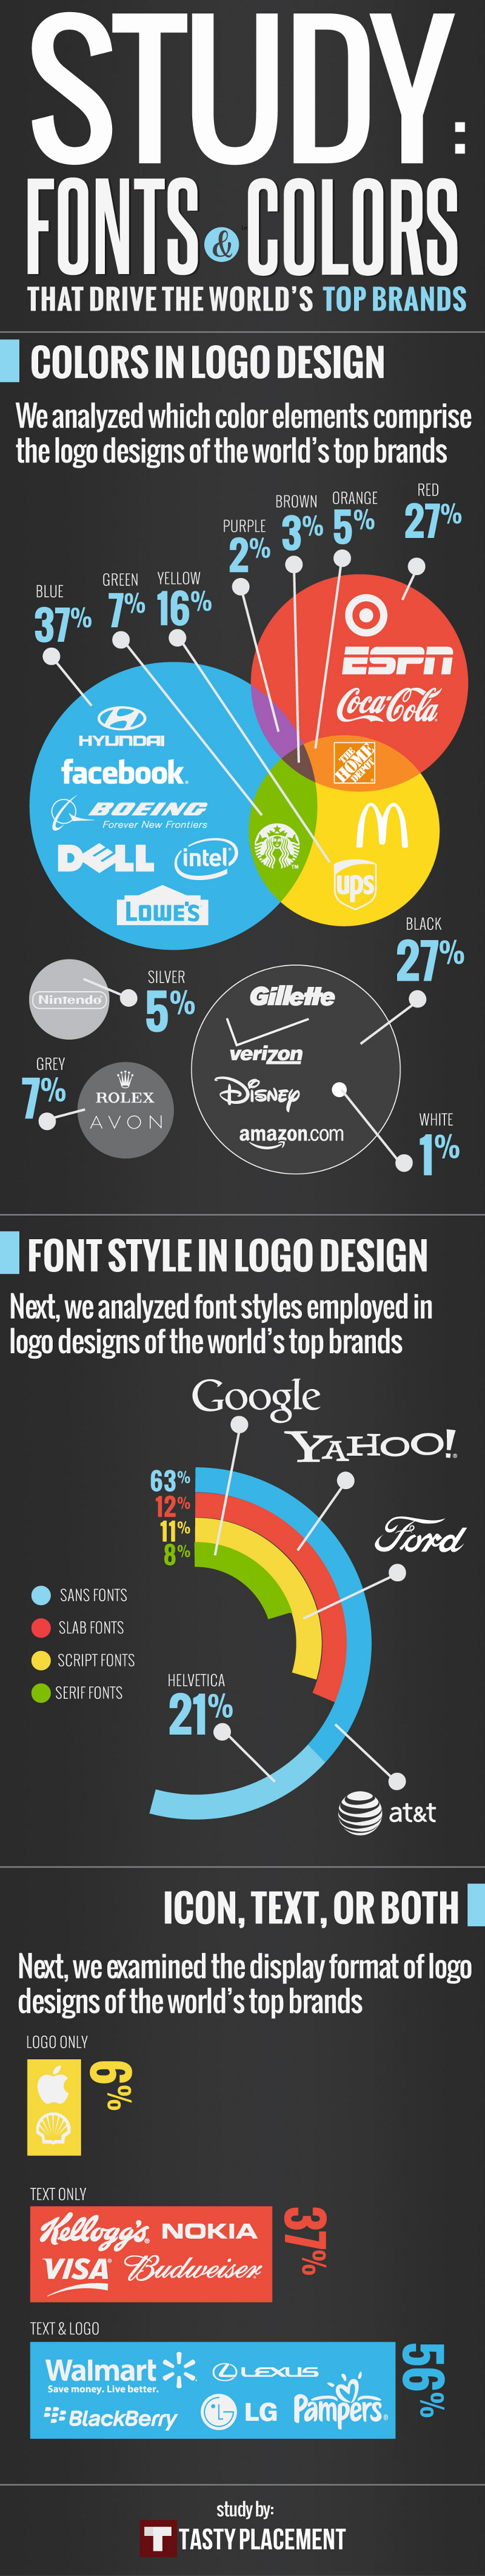 Most Popular Fonts Used in Major Brand Logos